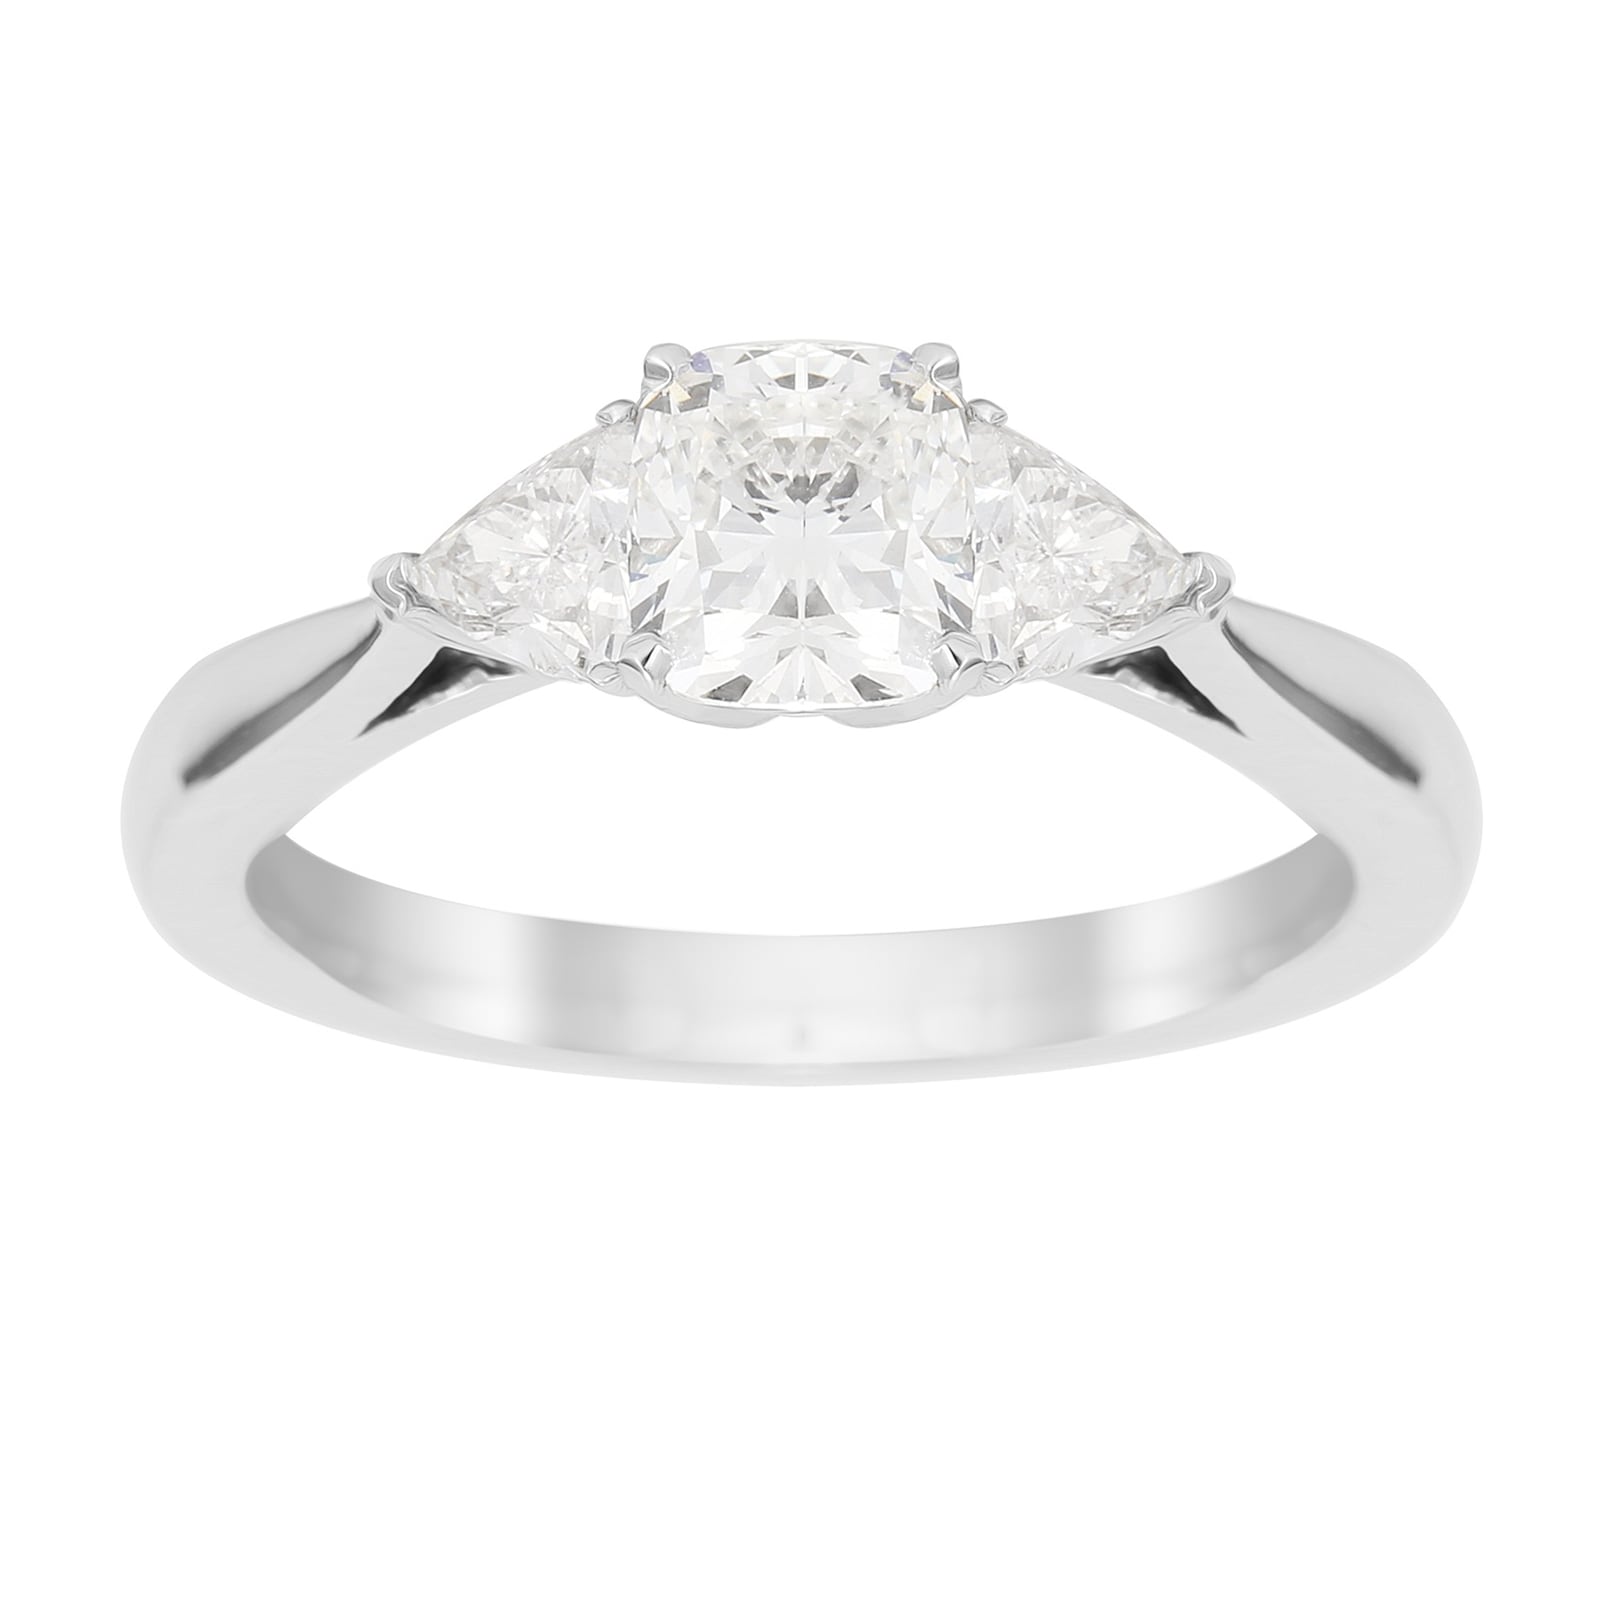 Mappin Webb Belvedere Platinum 0 85cttw Cushion Cut 3 Stone Engagement Ring J4323d 1l 085n Mappin And Webb